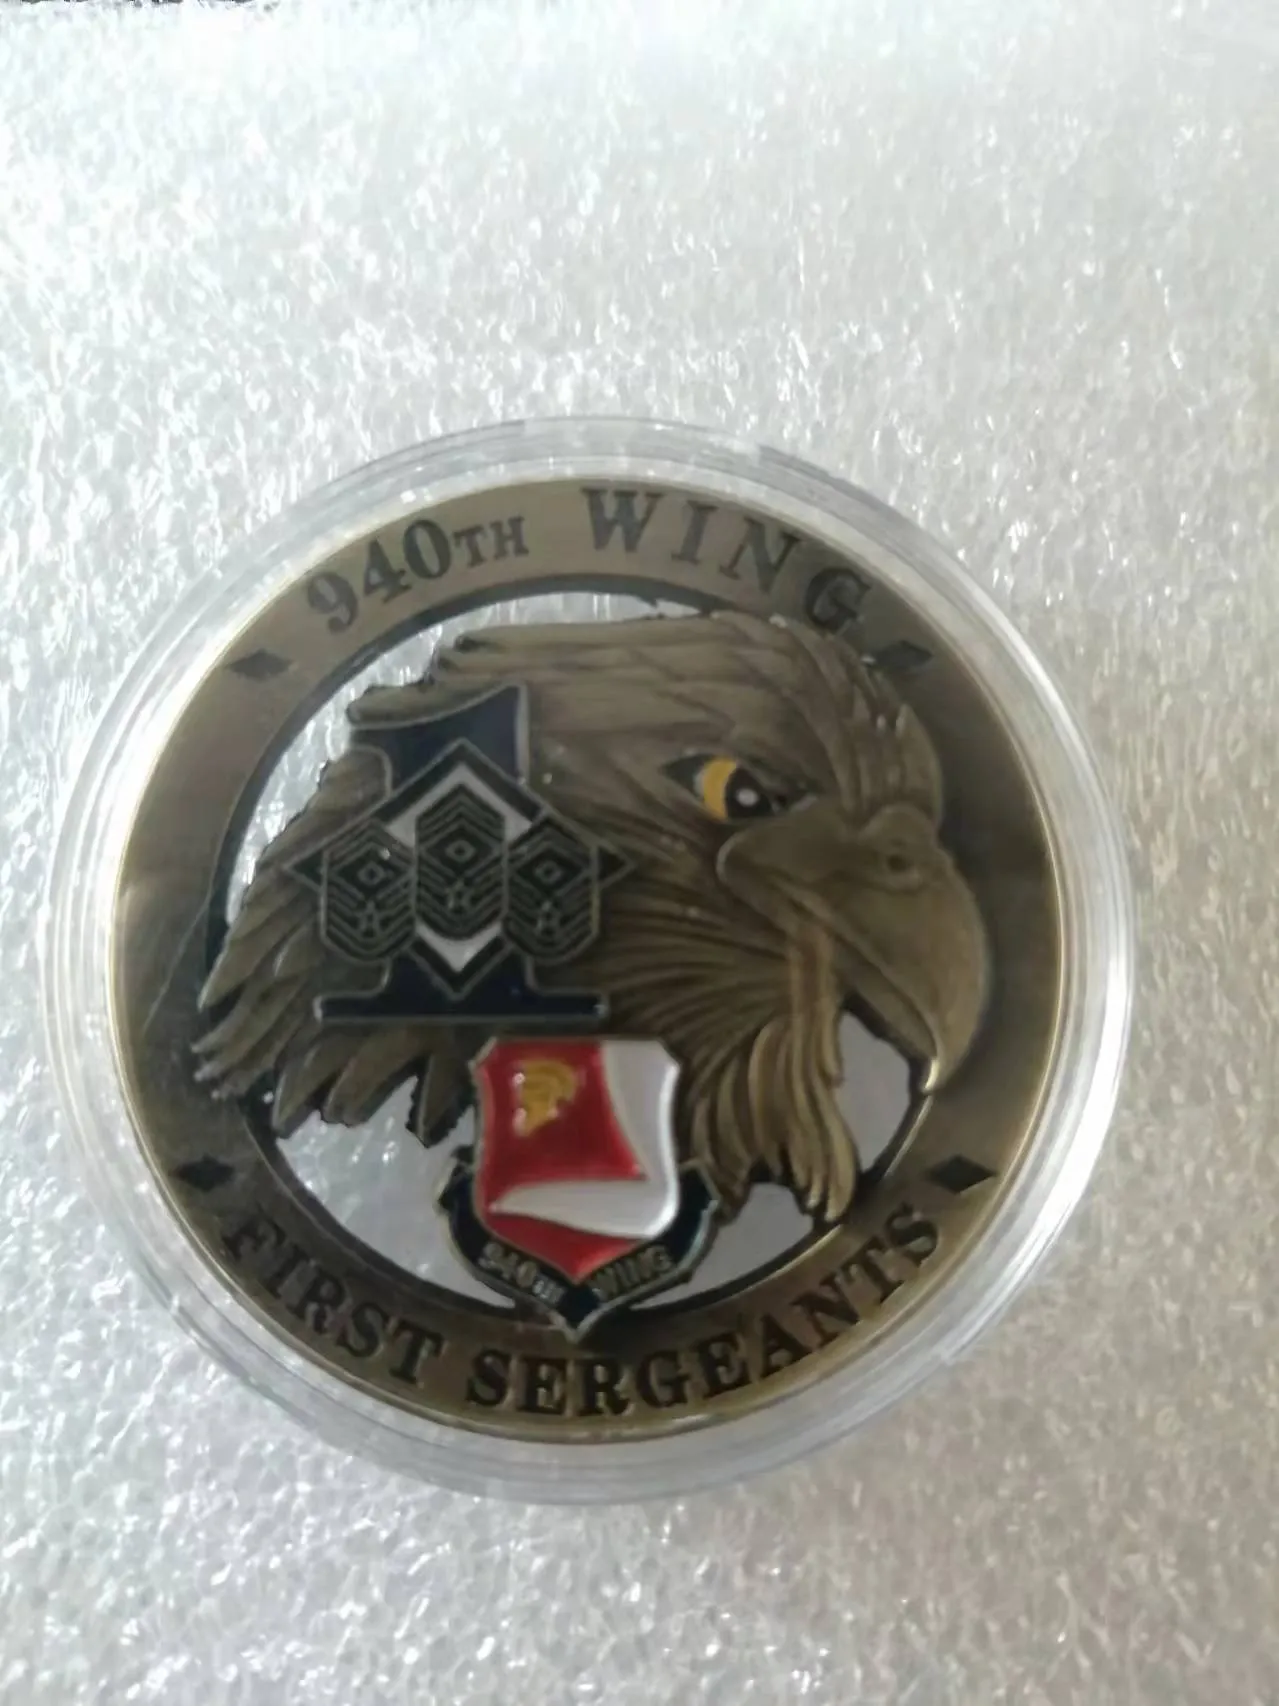 United States gift 940th Wing First Sergeants Souvenir Coin American Veteran Air Force Military Copper Plated Commemorative Coin